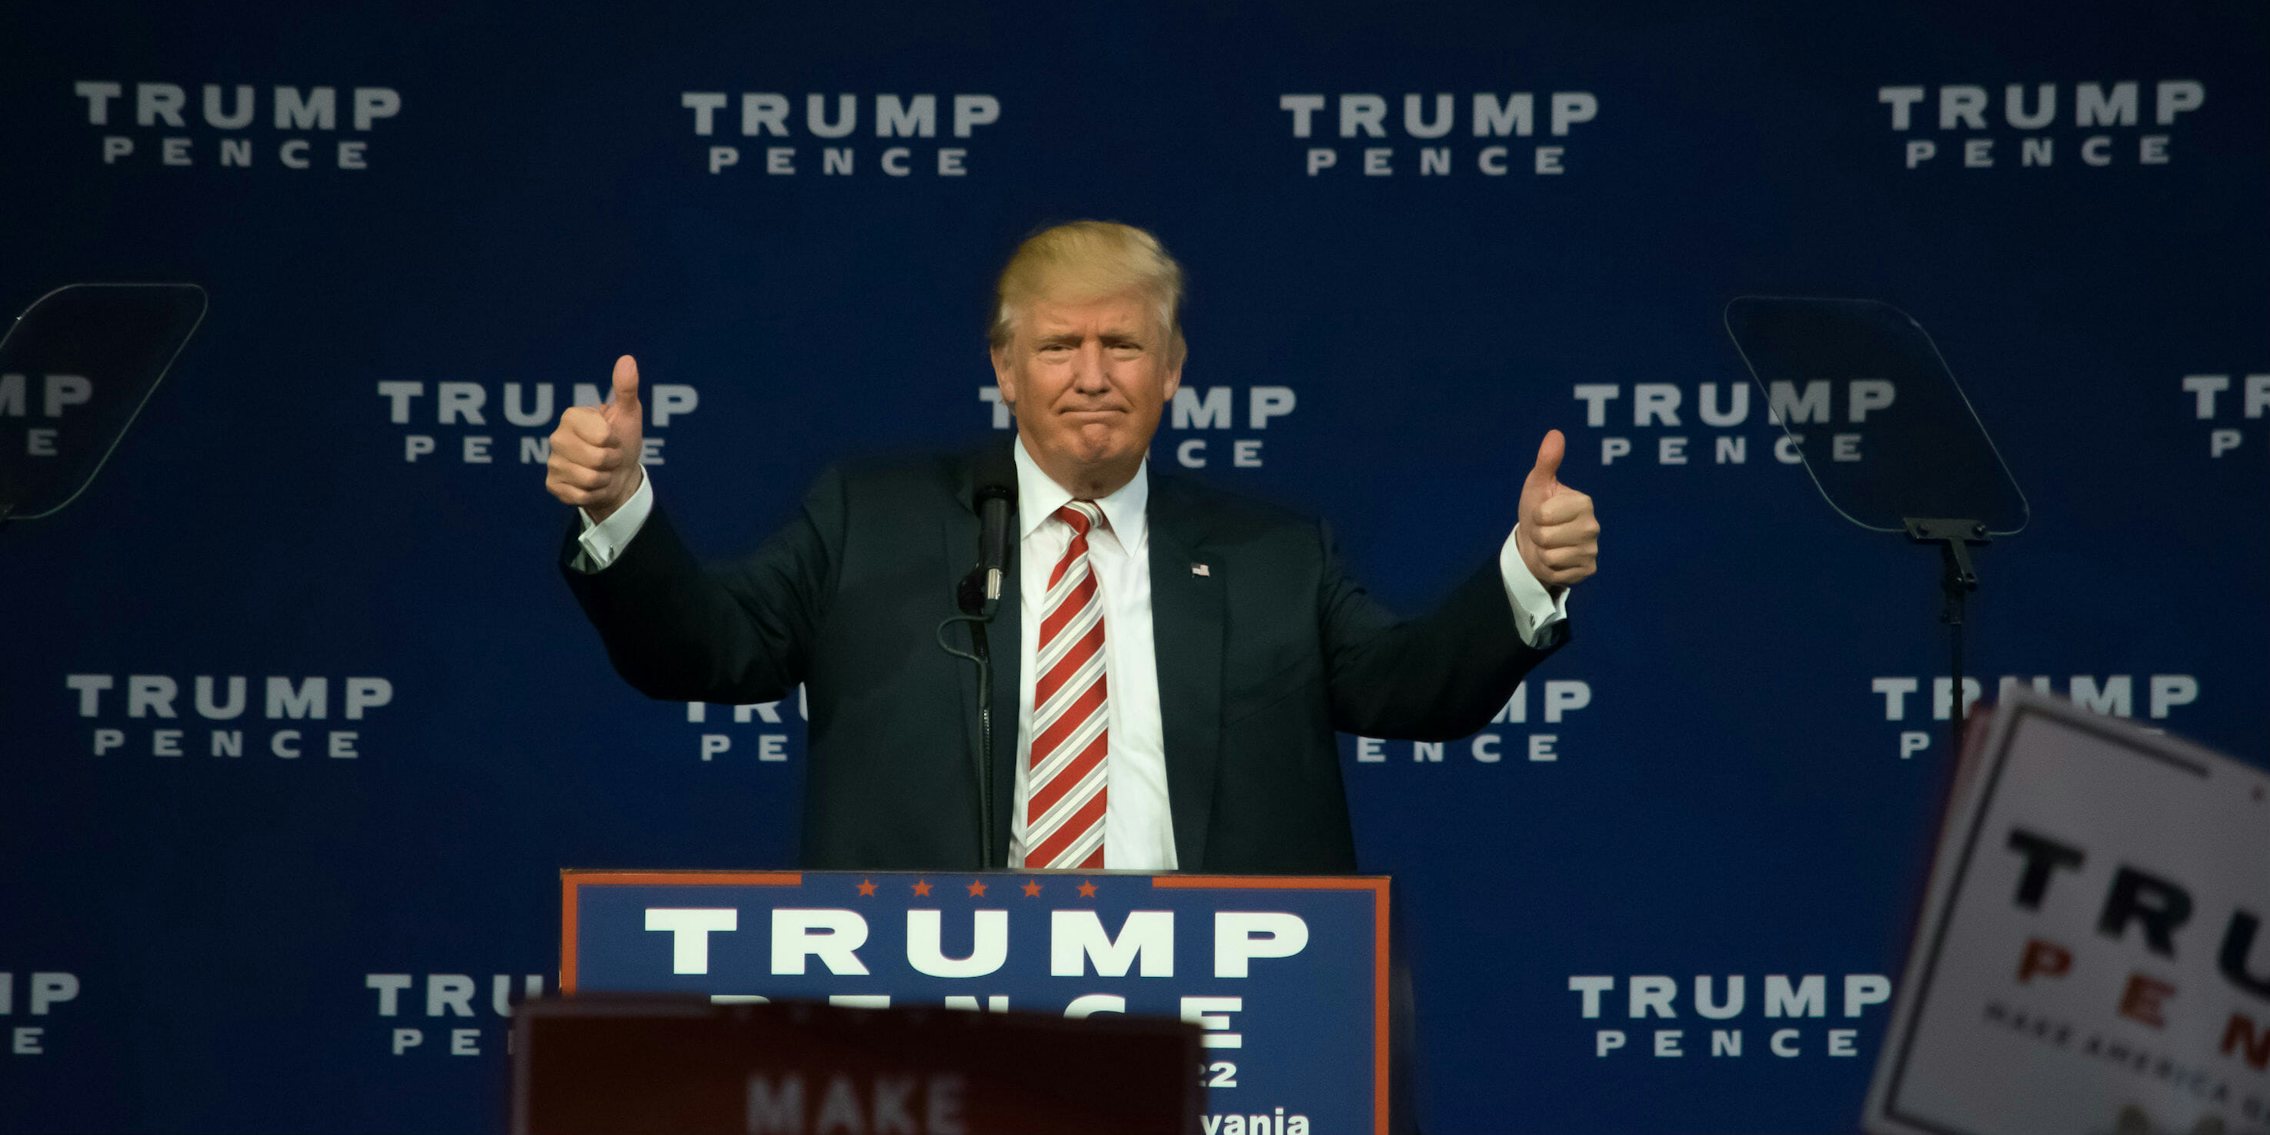 donald trump thumbs up at presidential rally